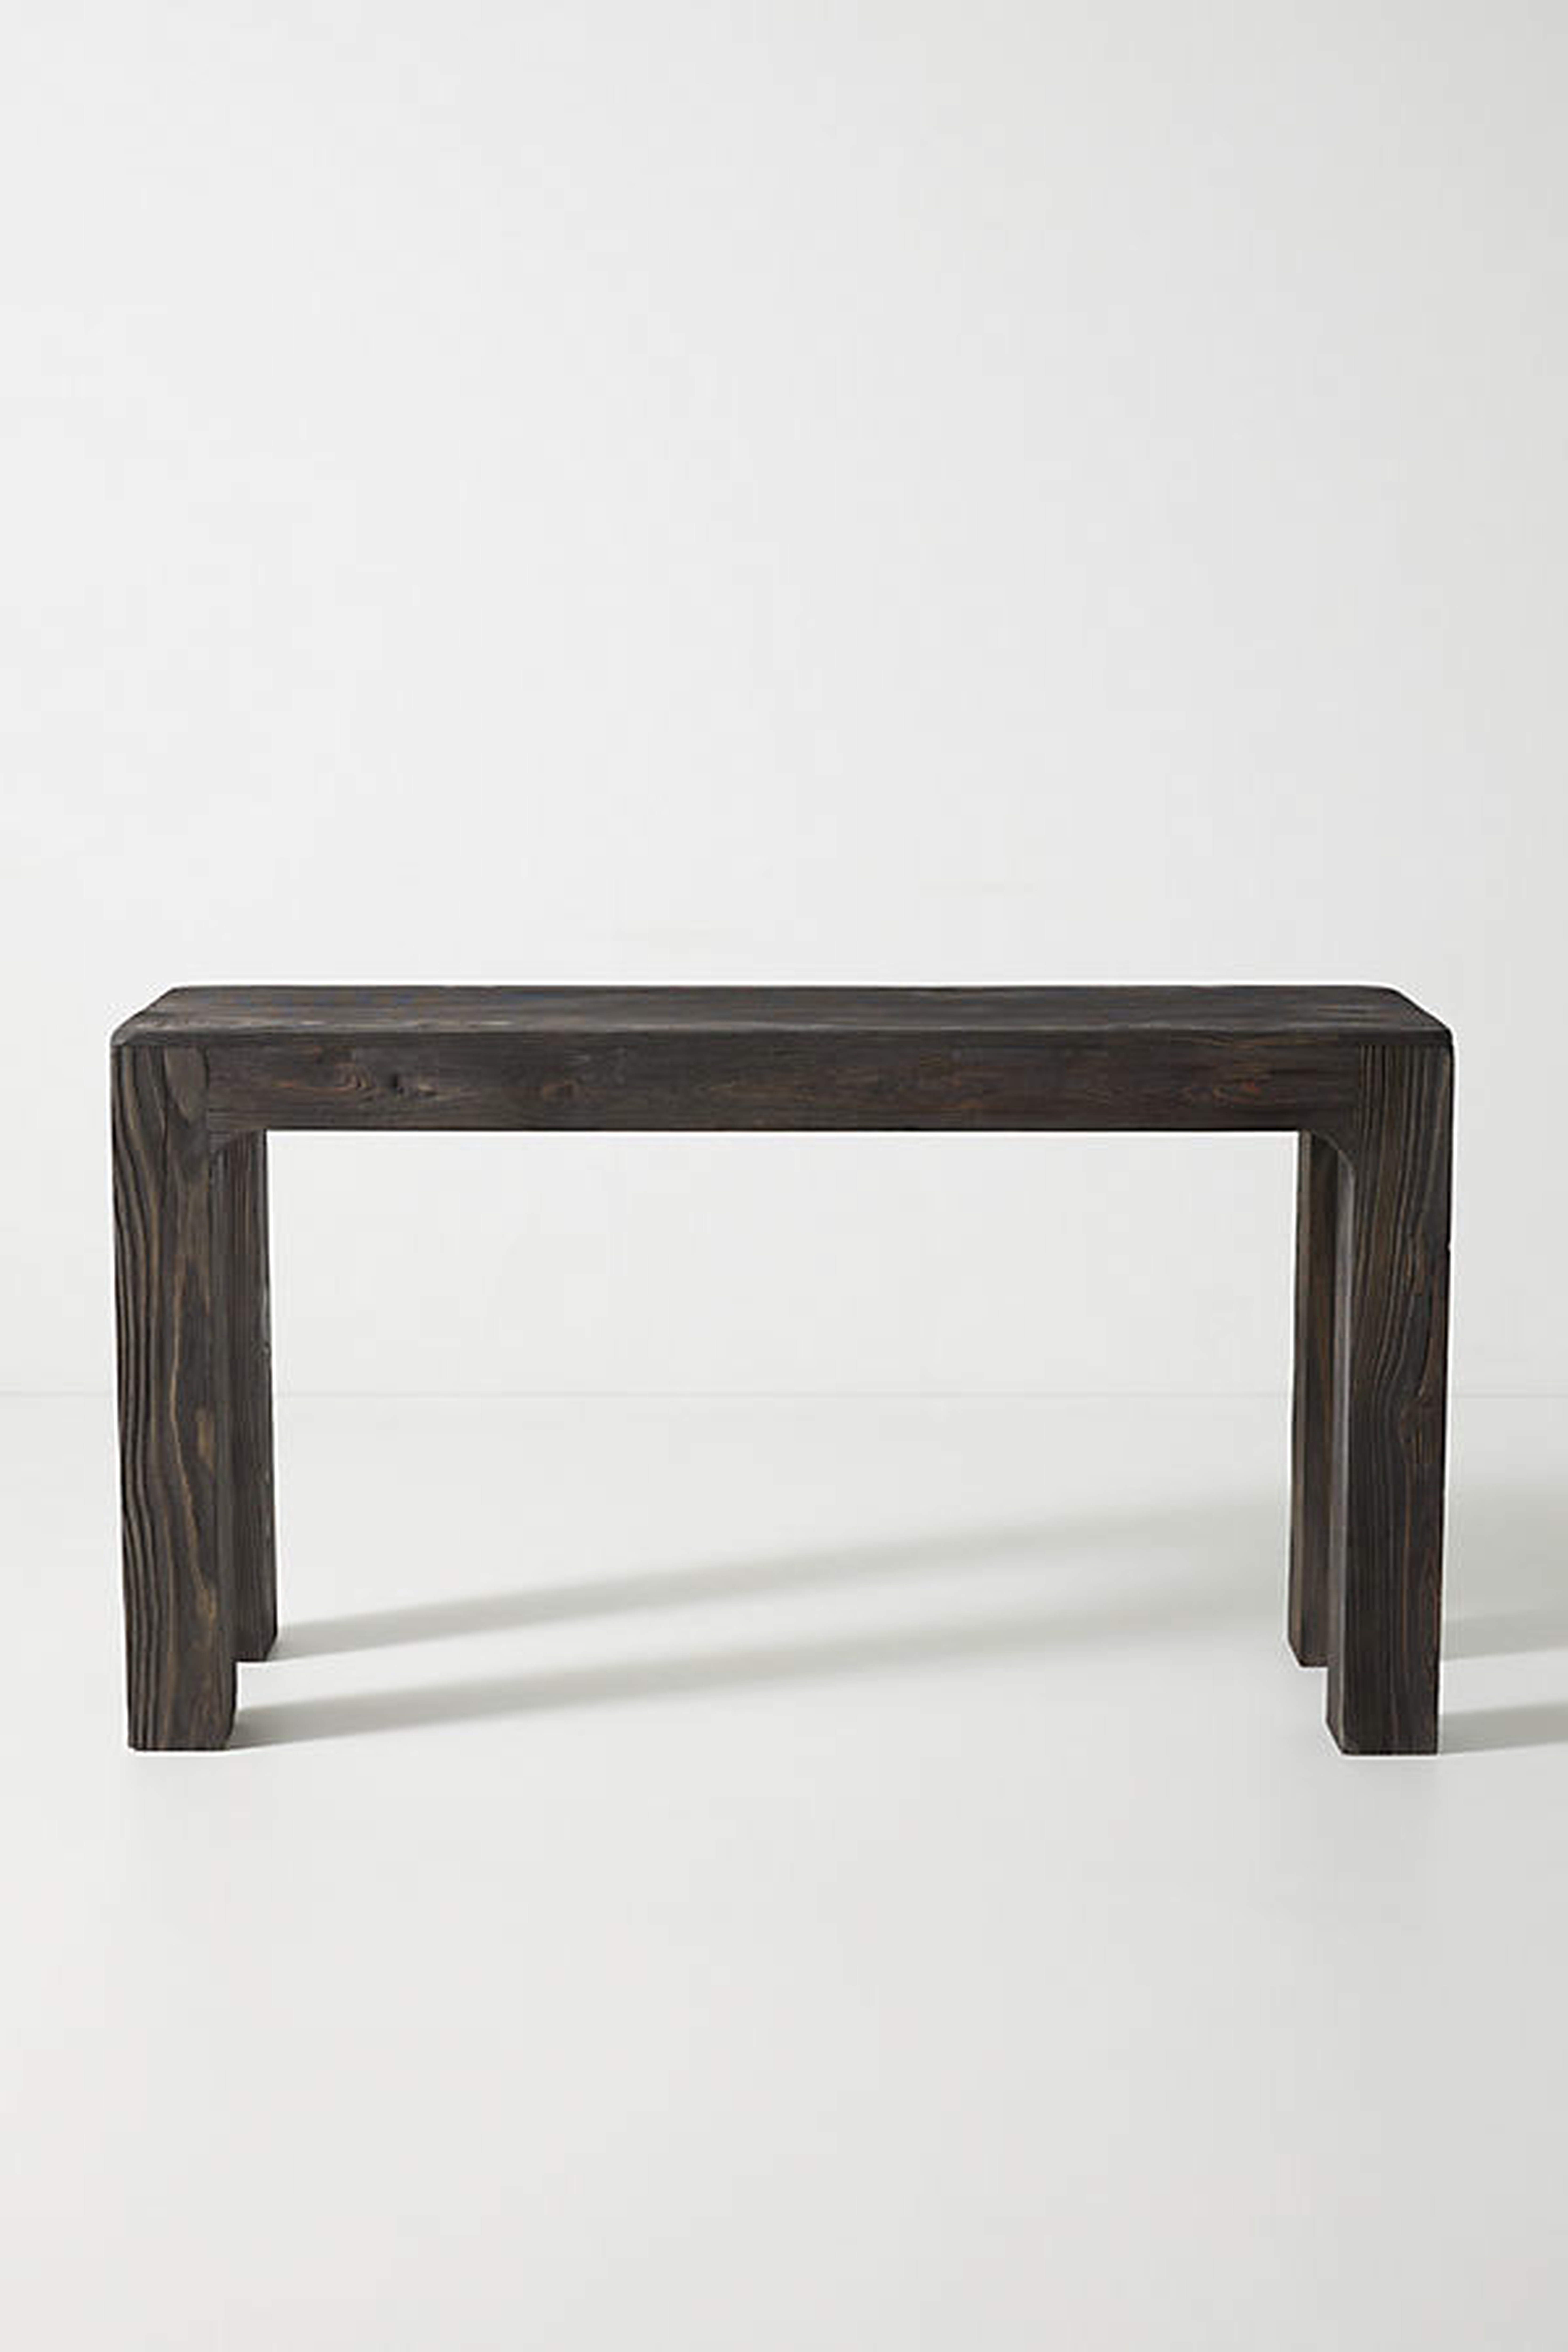 Kiefer Pine Wood Console Table By Anthropologie in Black - Anthropologie